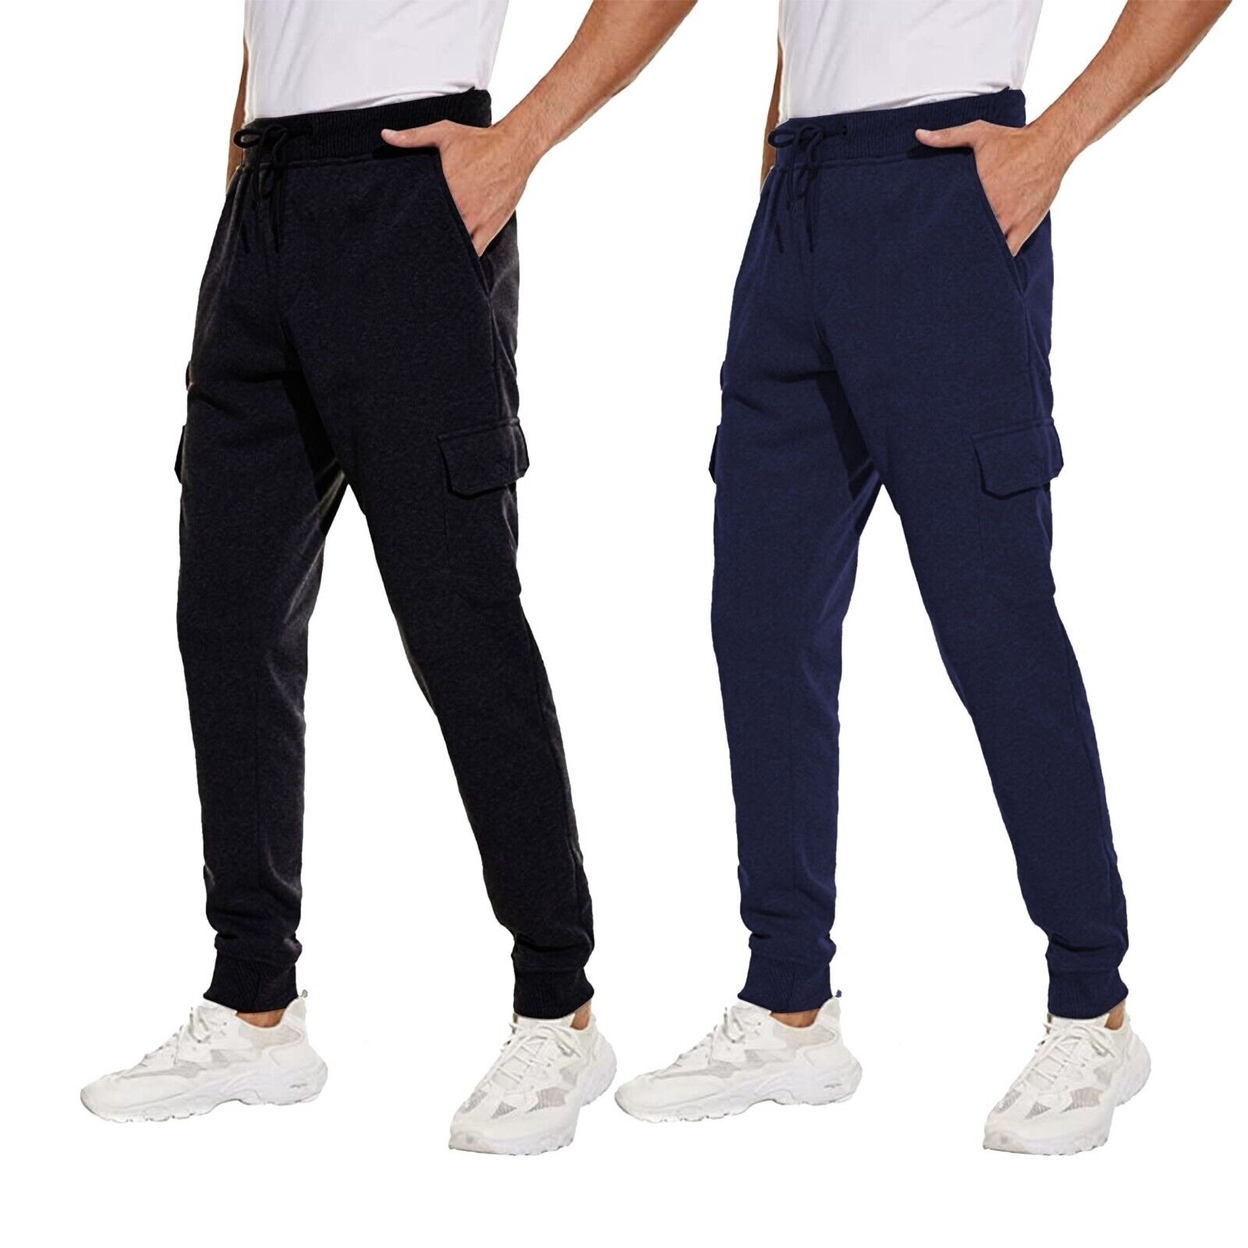 2-Pack Men's Ultra Soft Winter Warm Thick Athletic Sherpa Lined Jogger Pants - Black&navy, 3xl